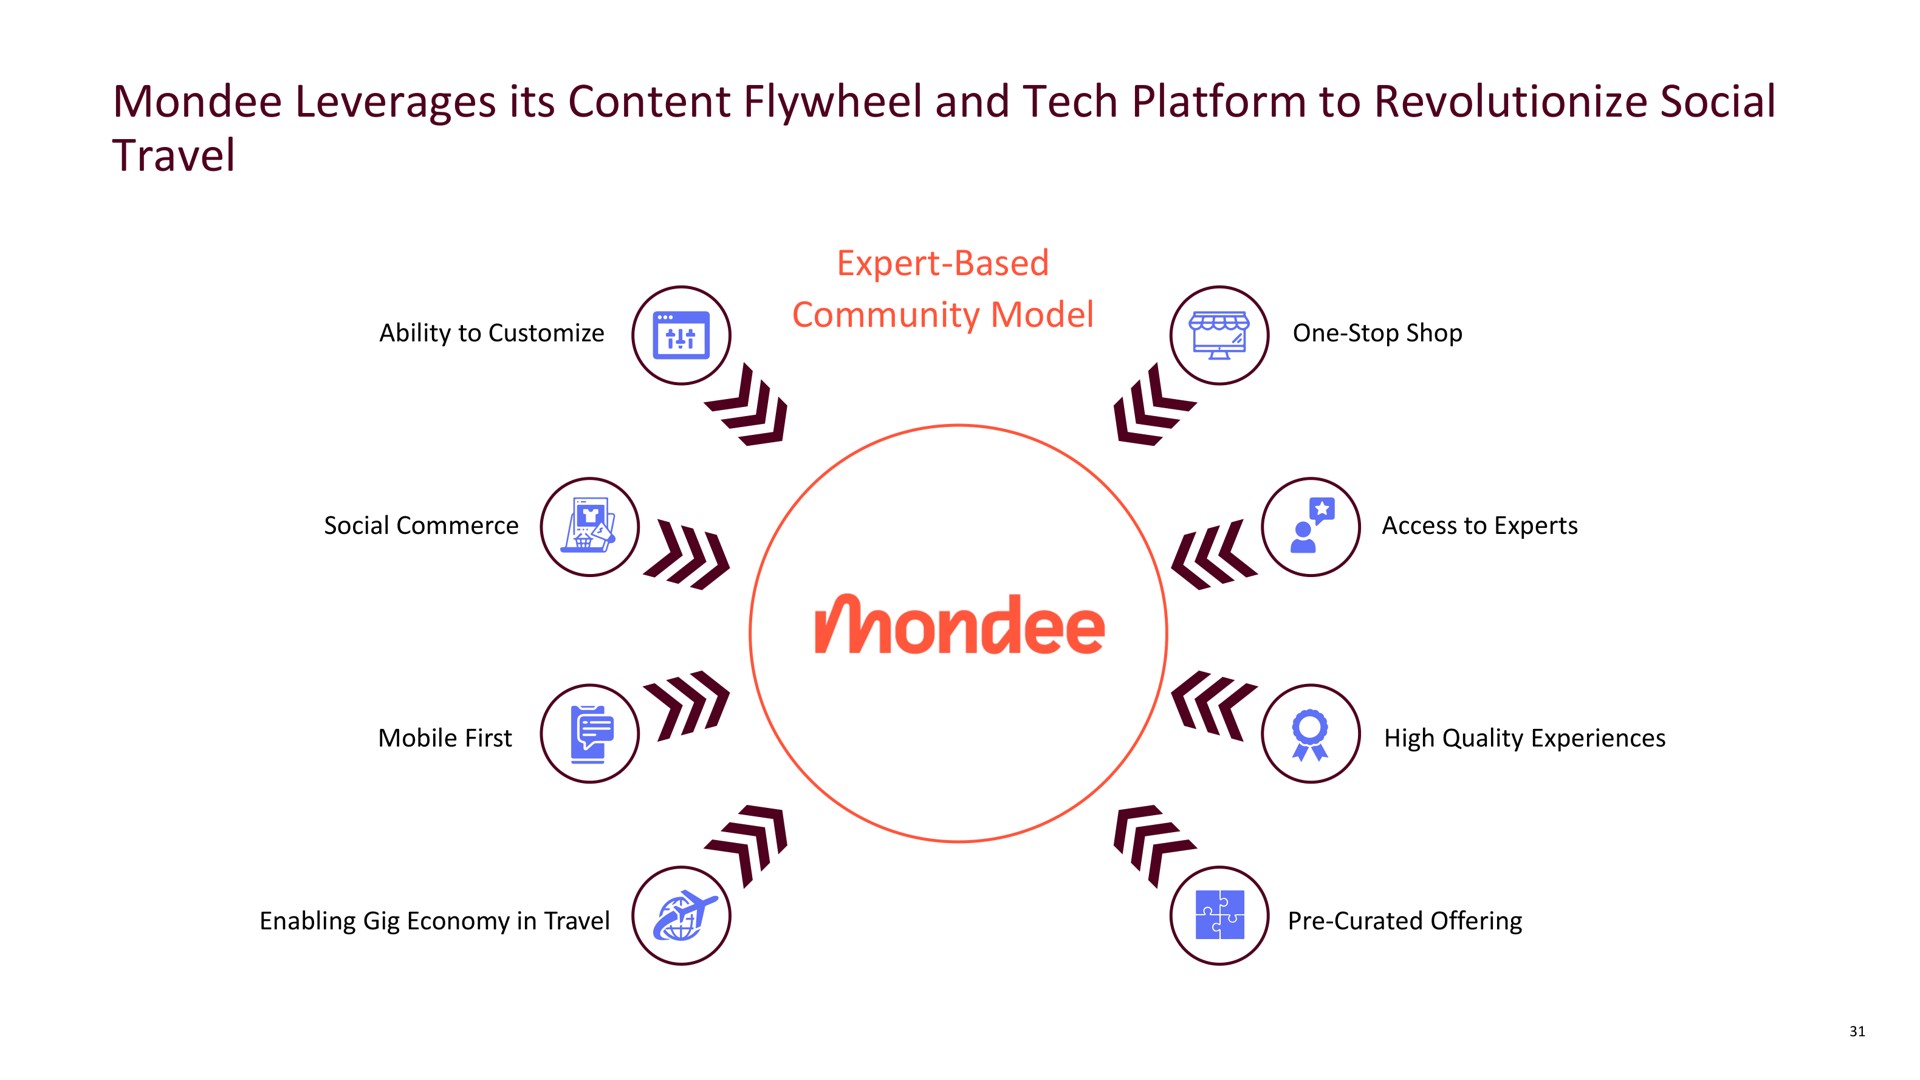 leverages its content flywheel and tech platform to revolutionize social travel a | Mondee